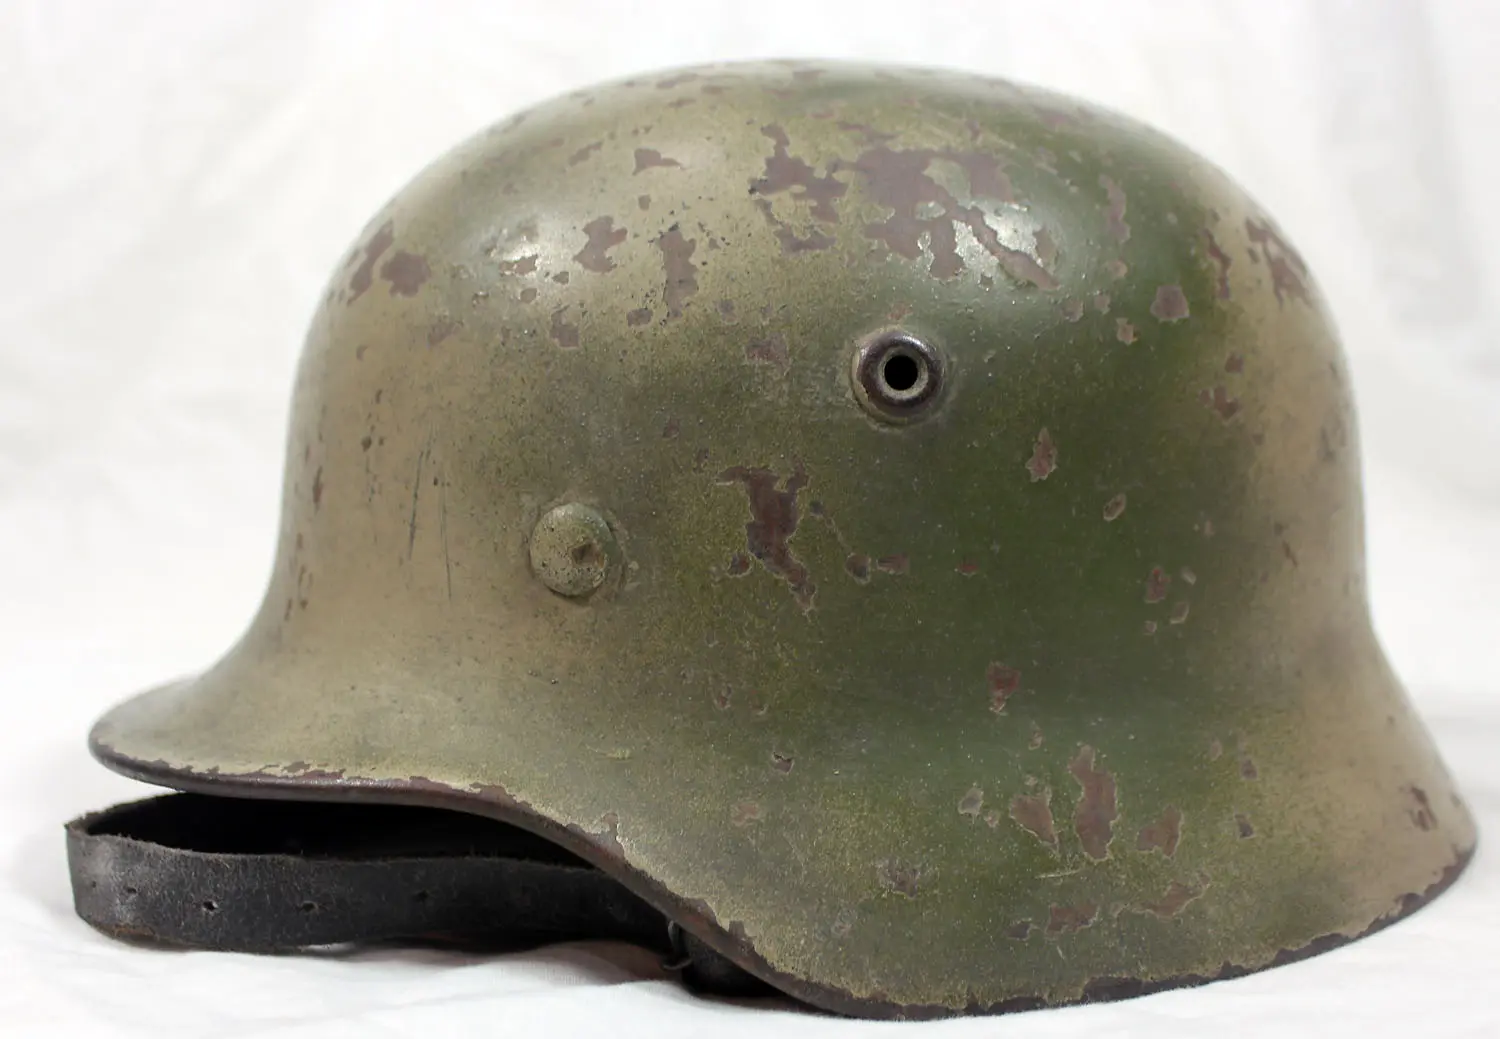 A green helmet with brown spots on it.